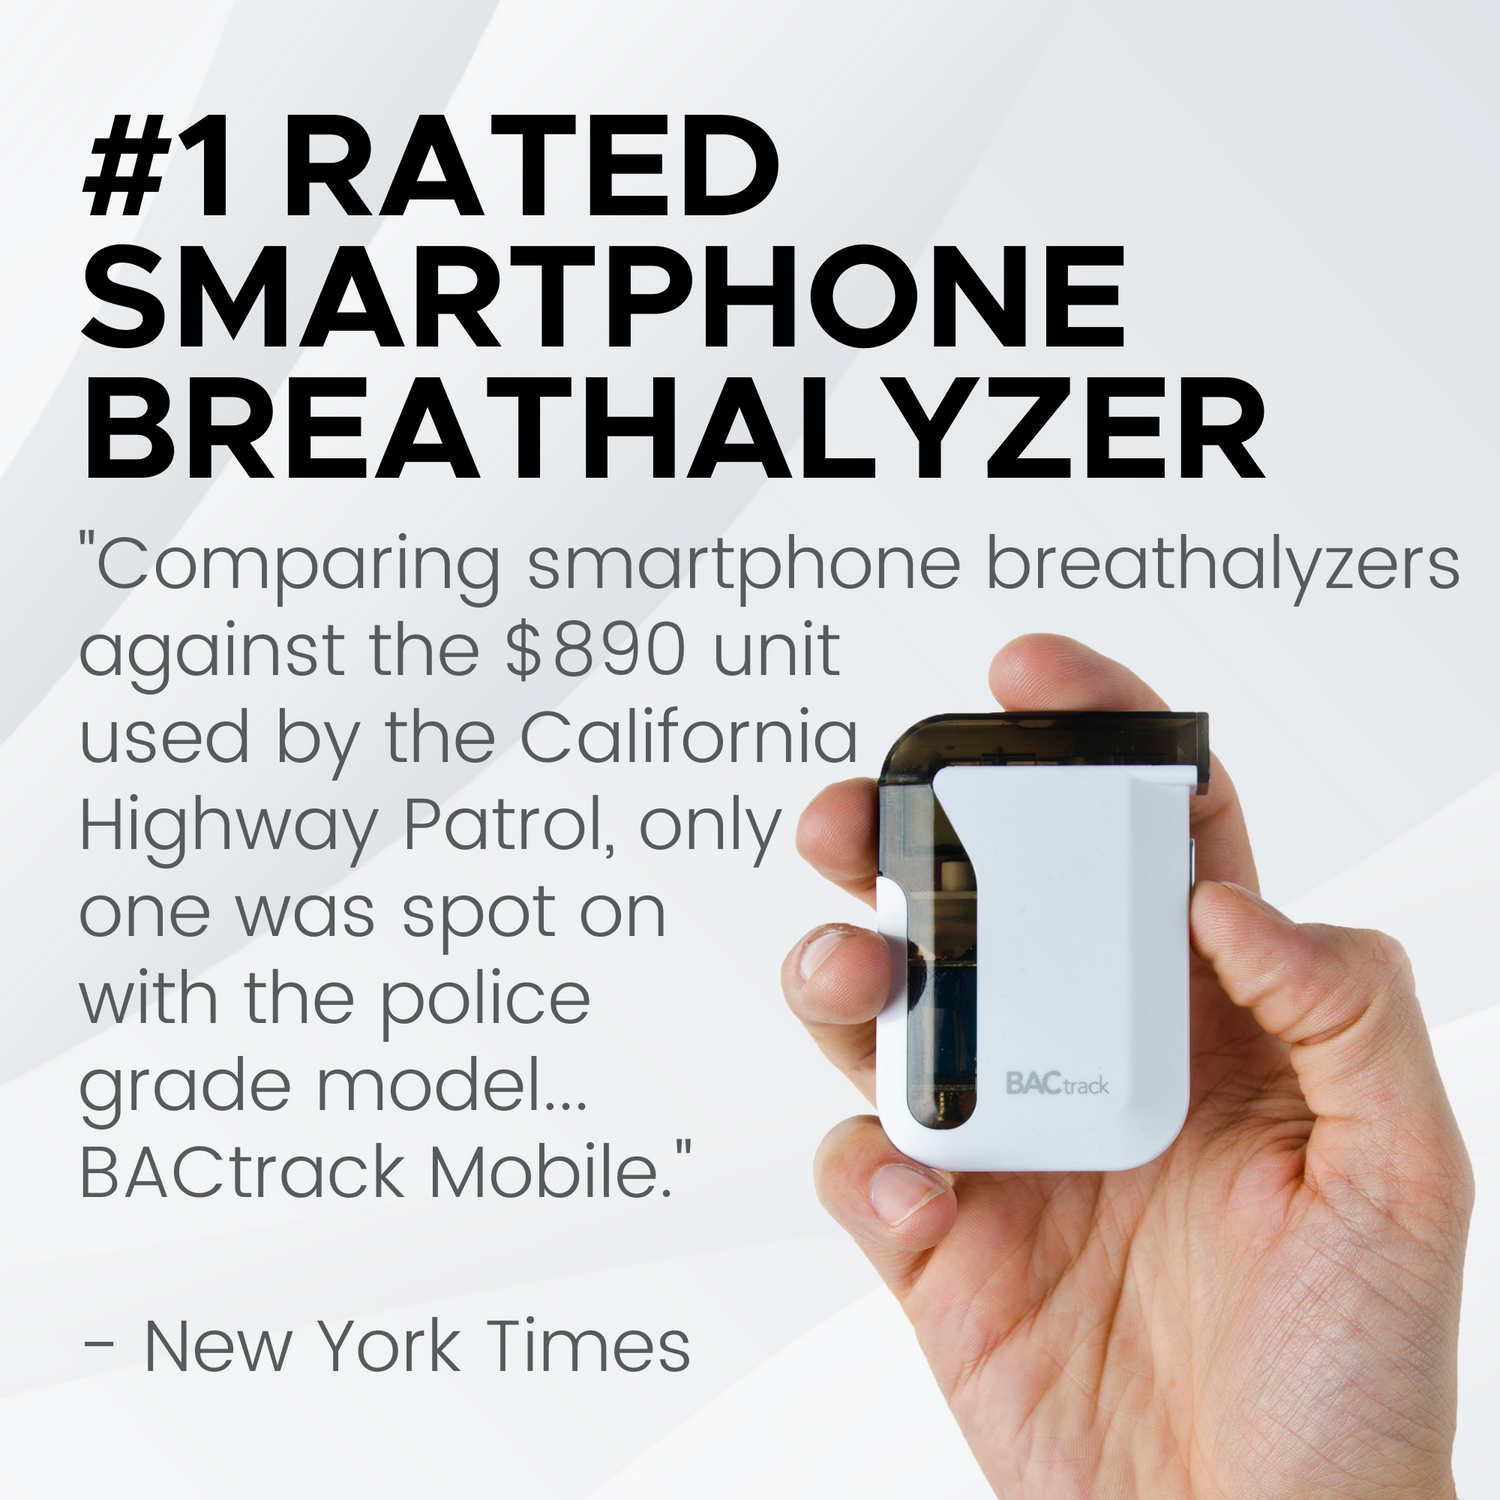 BACtrack Mobile Smartphone Breathalyzer | Professional-Grade Accuracy | Wireless Smartphone Connectivity | Compatible w/ Apple iPhone, Google & Samsung Android Devices | Apple HealthKit Integration - image 5 of 8